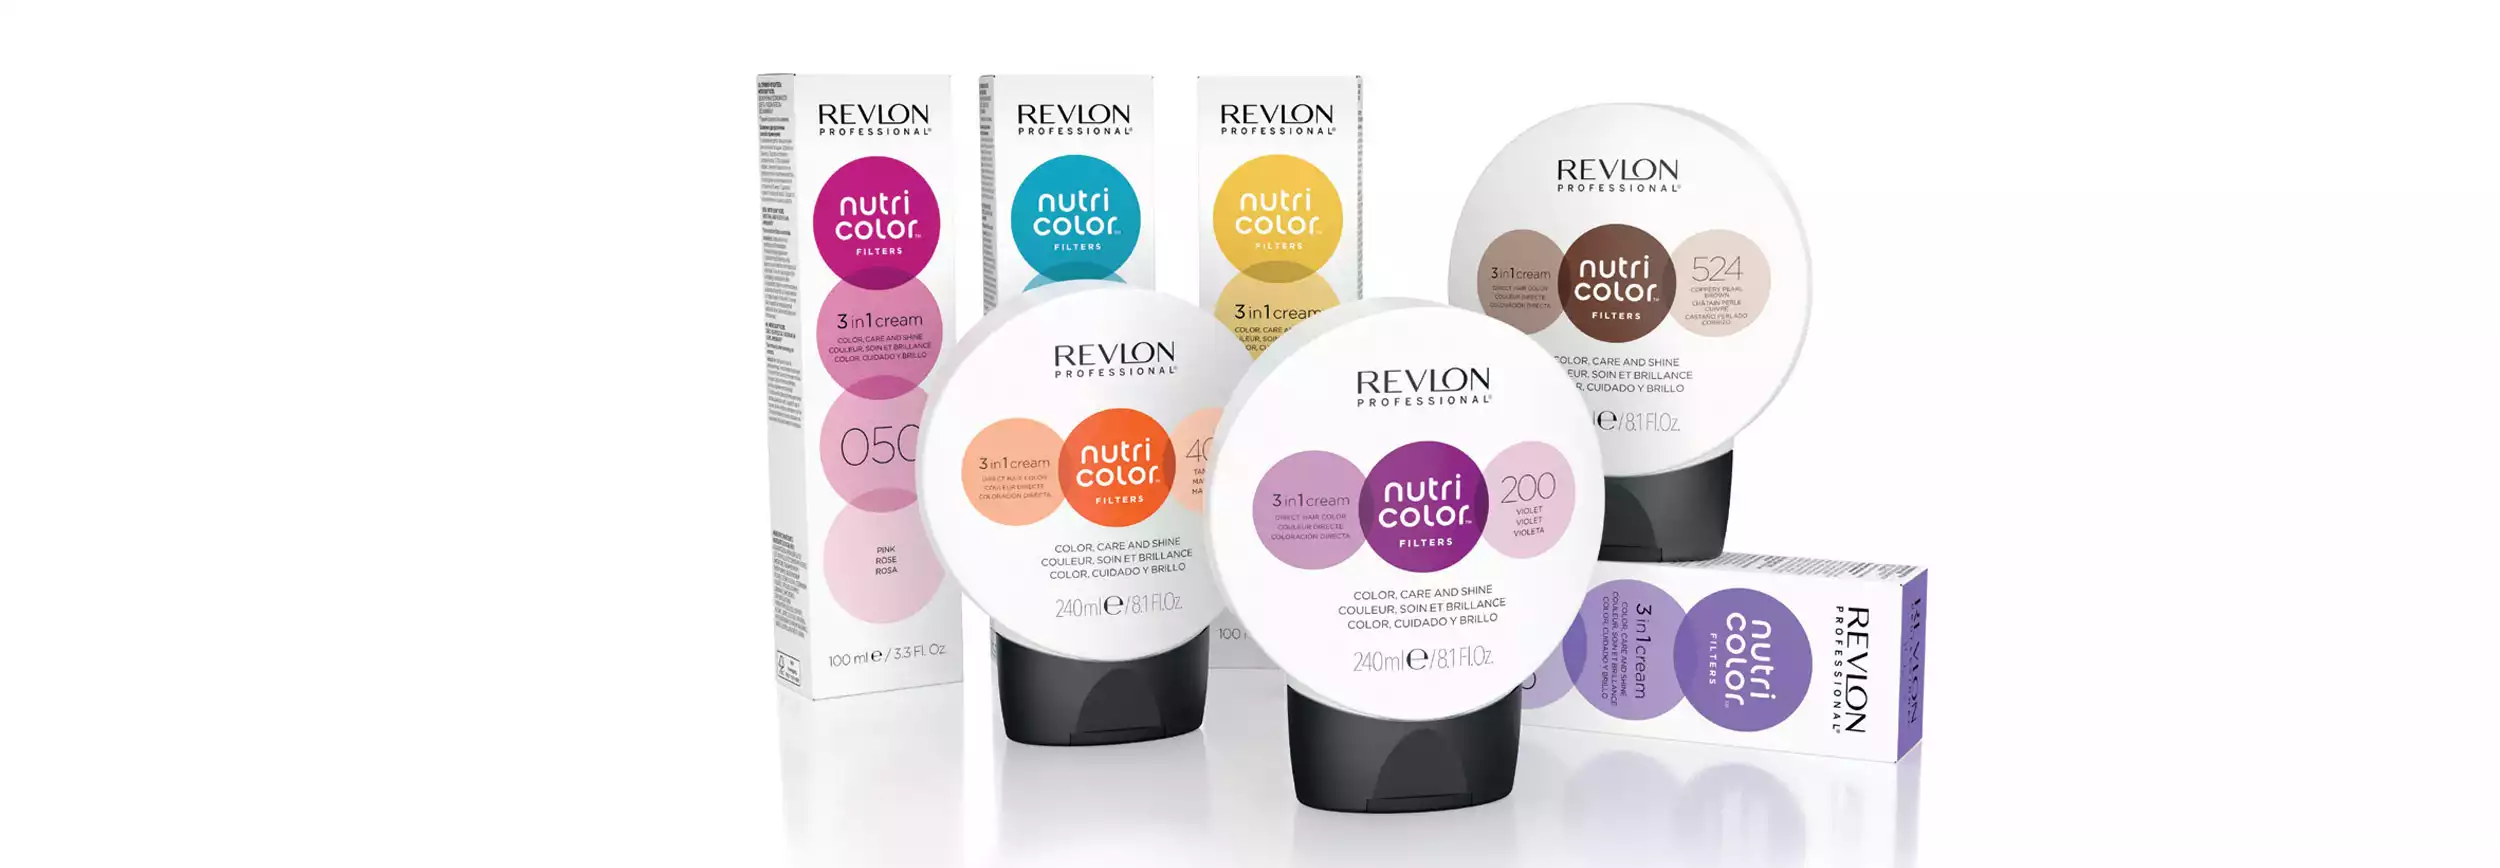 Revlon professional hair care products